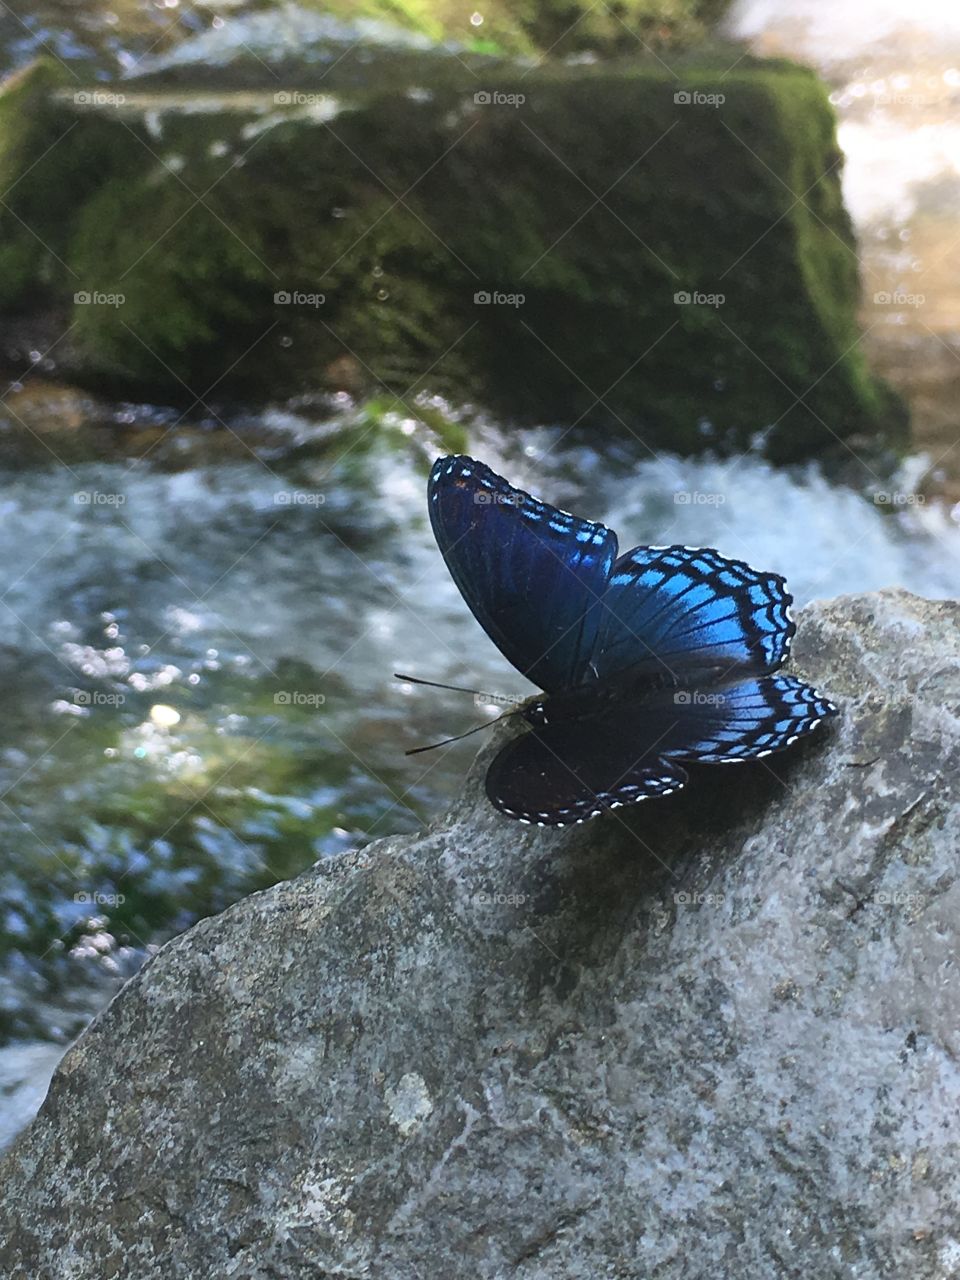 Beautiful blue butterfly at the mouth of the cave. Blanchard Springs Caverns, Mountain View, AR. 